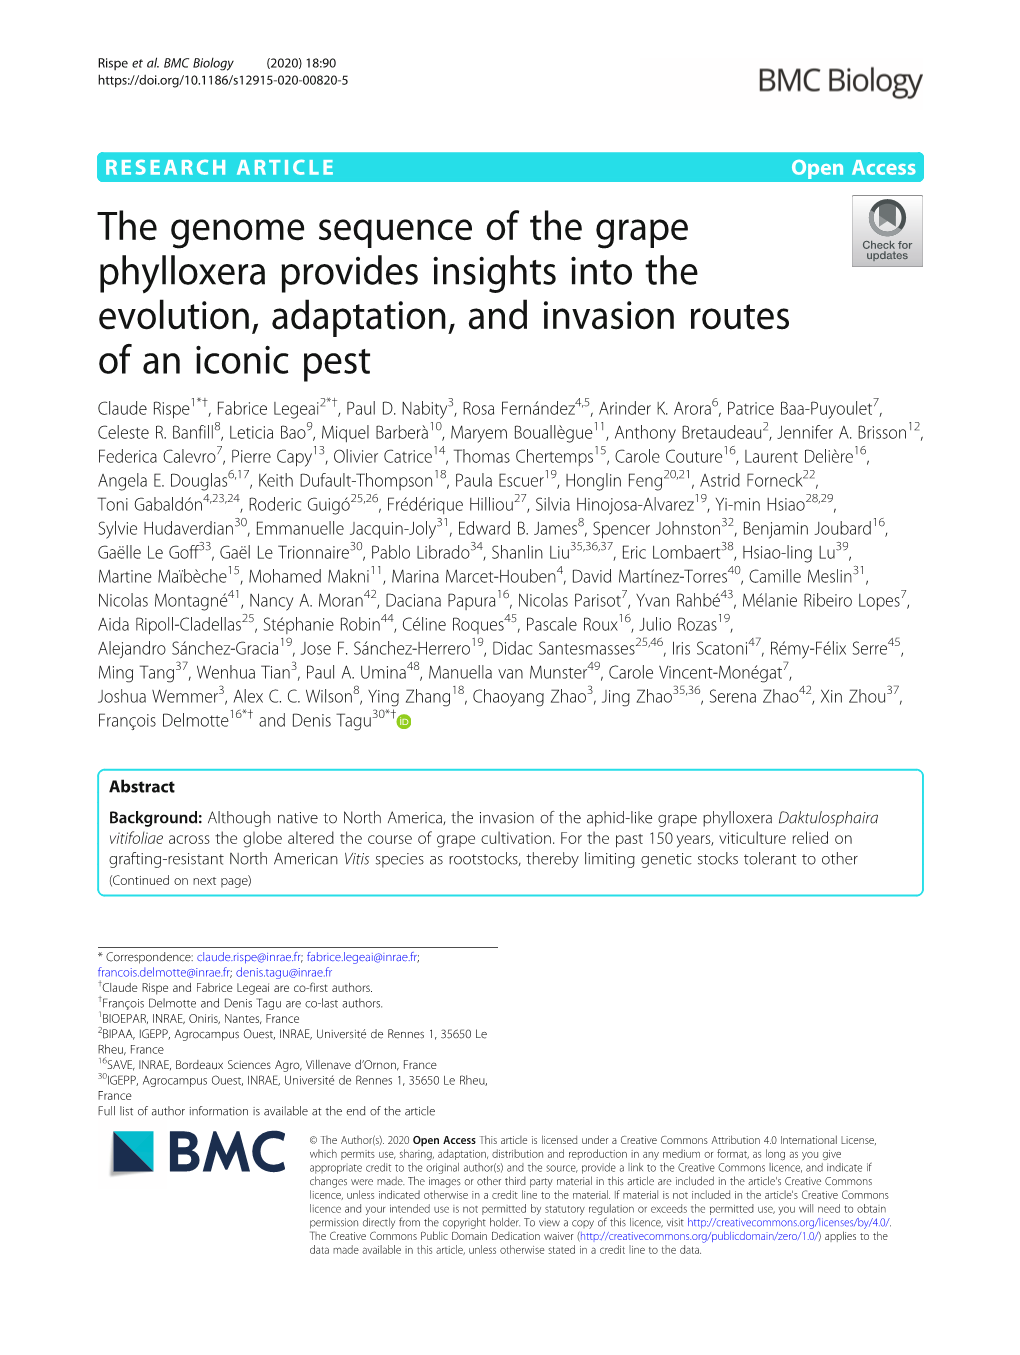 The Genome Sequence of the Grape Phylloxera